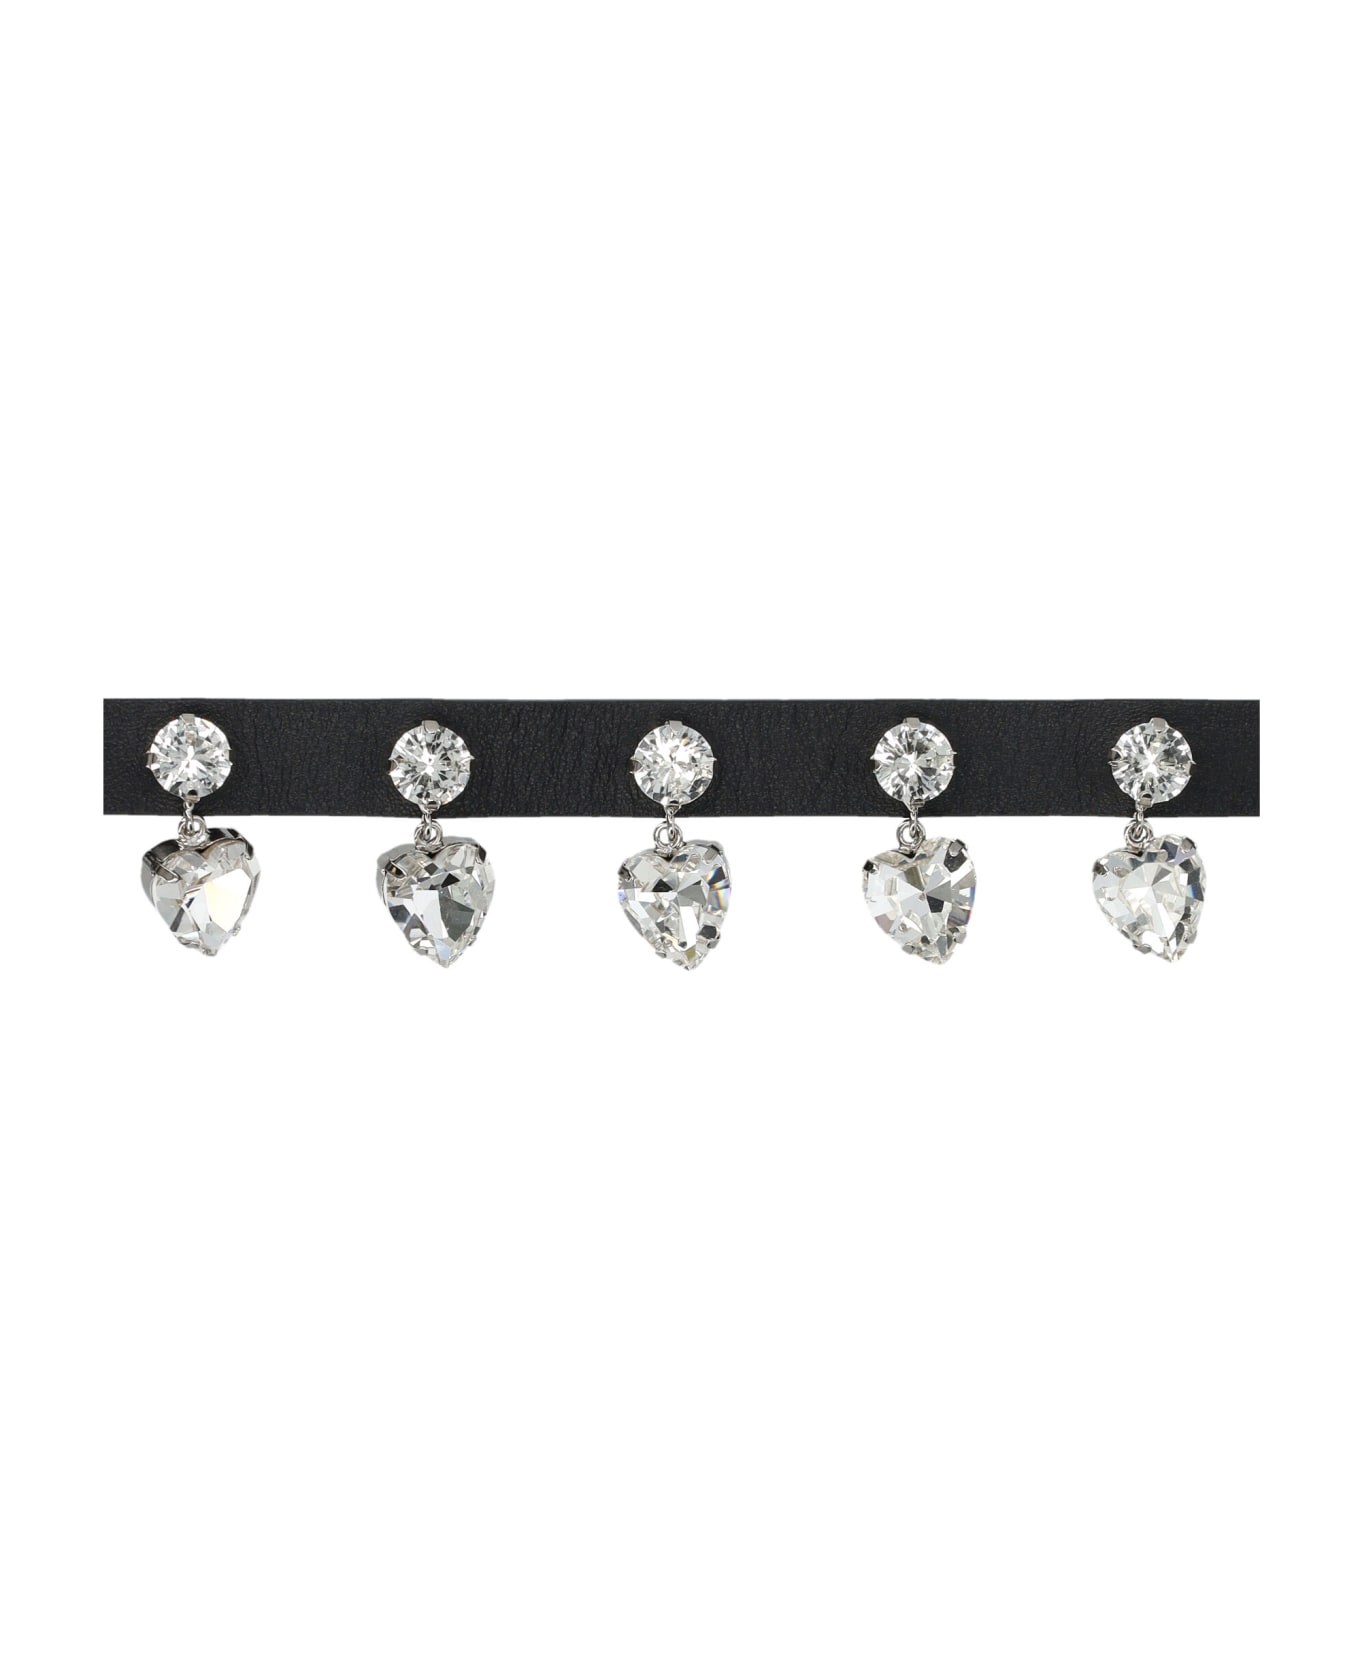 Alessandra Rich Chocker With Pendent Crystals - BLACK + CRYSTAL ネックレス